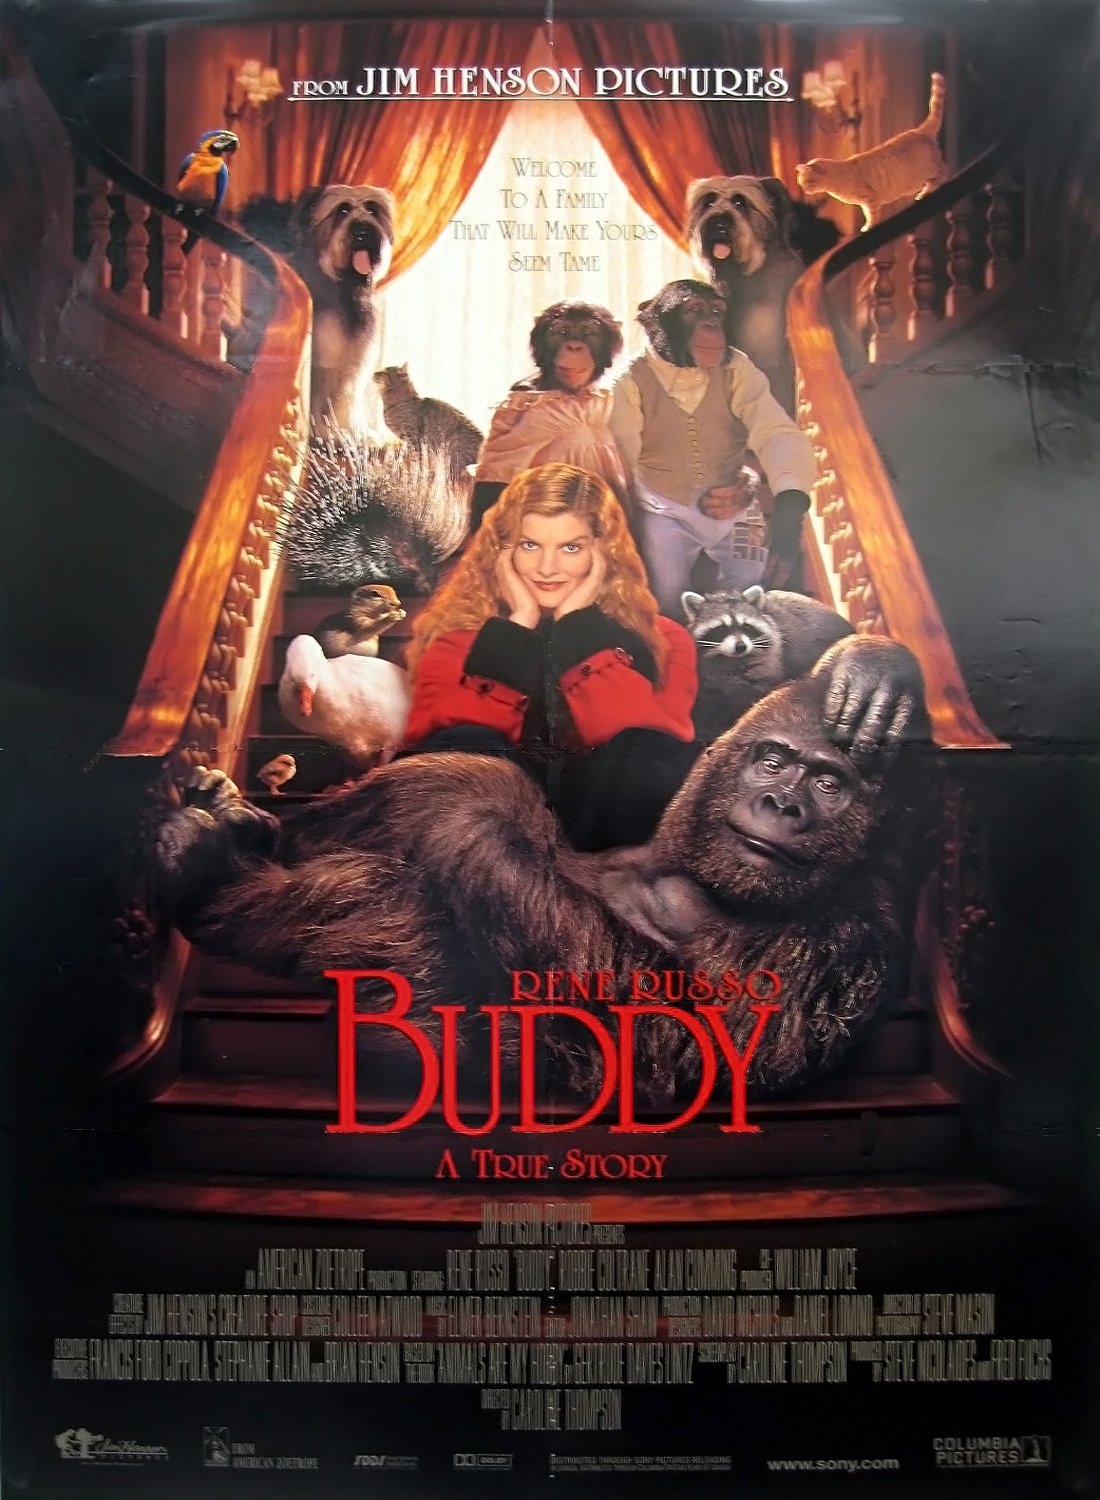 Poster for the movie "Buddy"